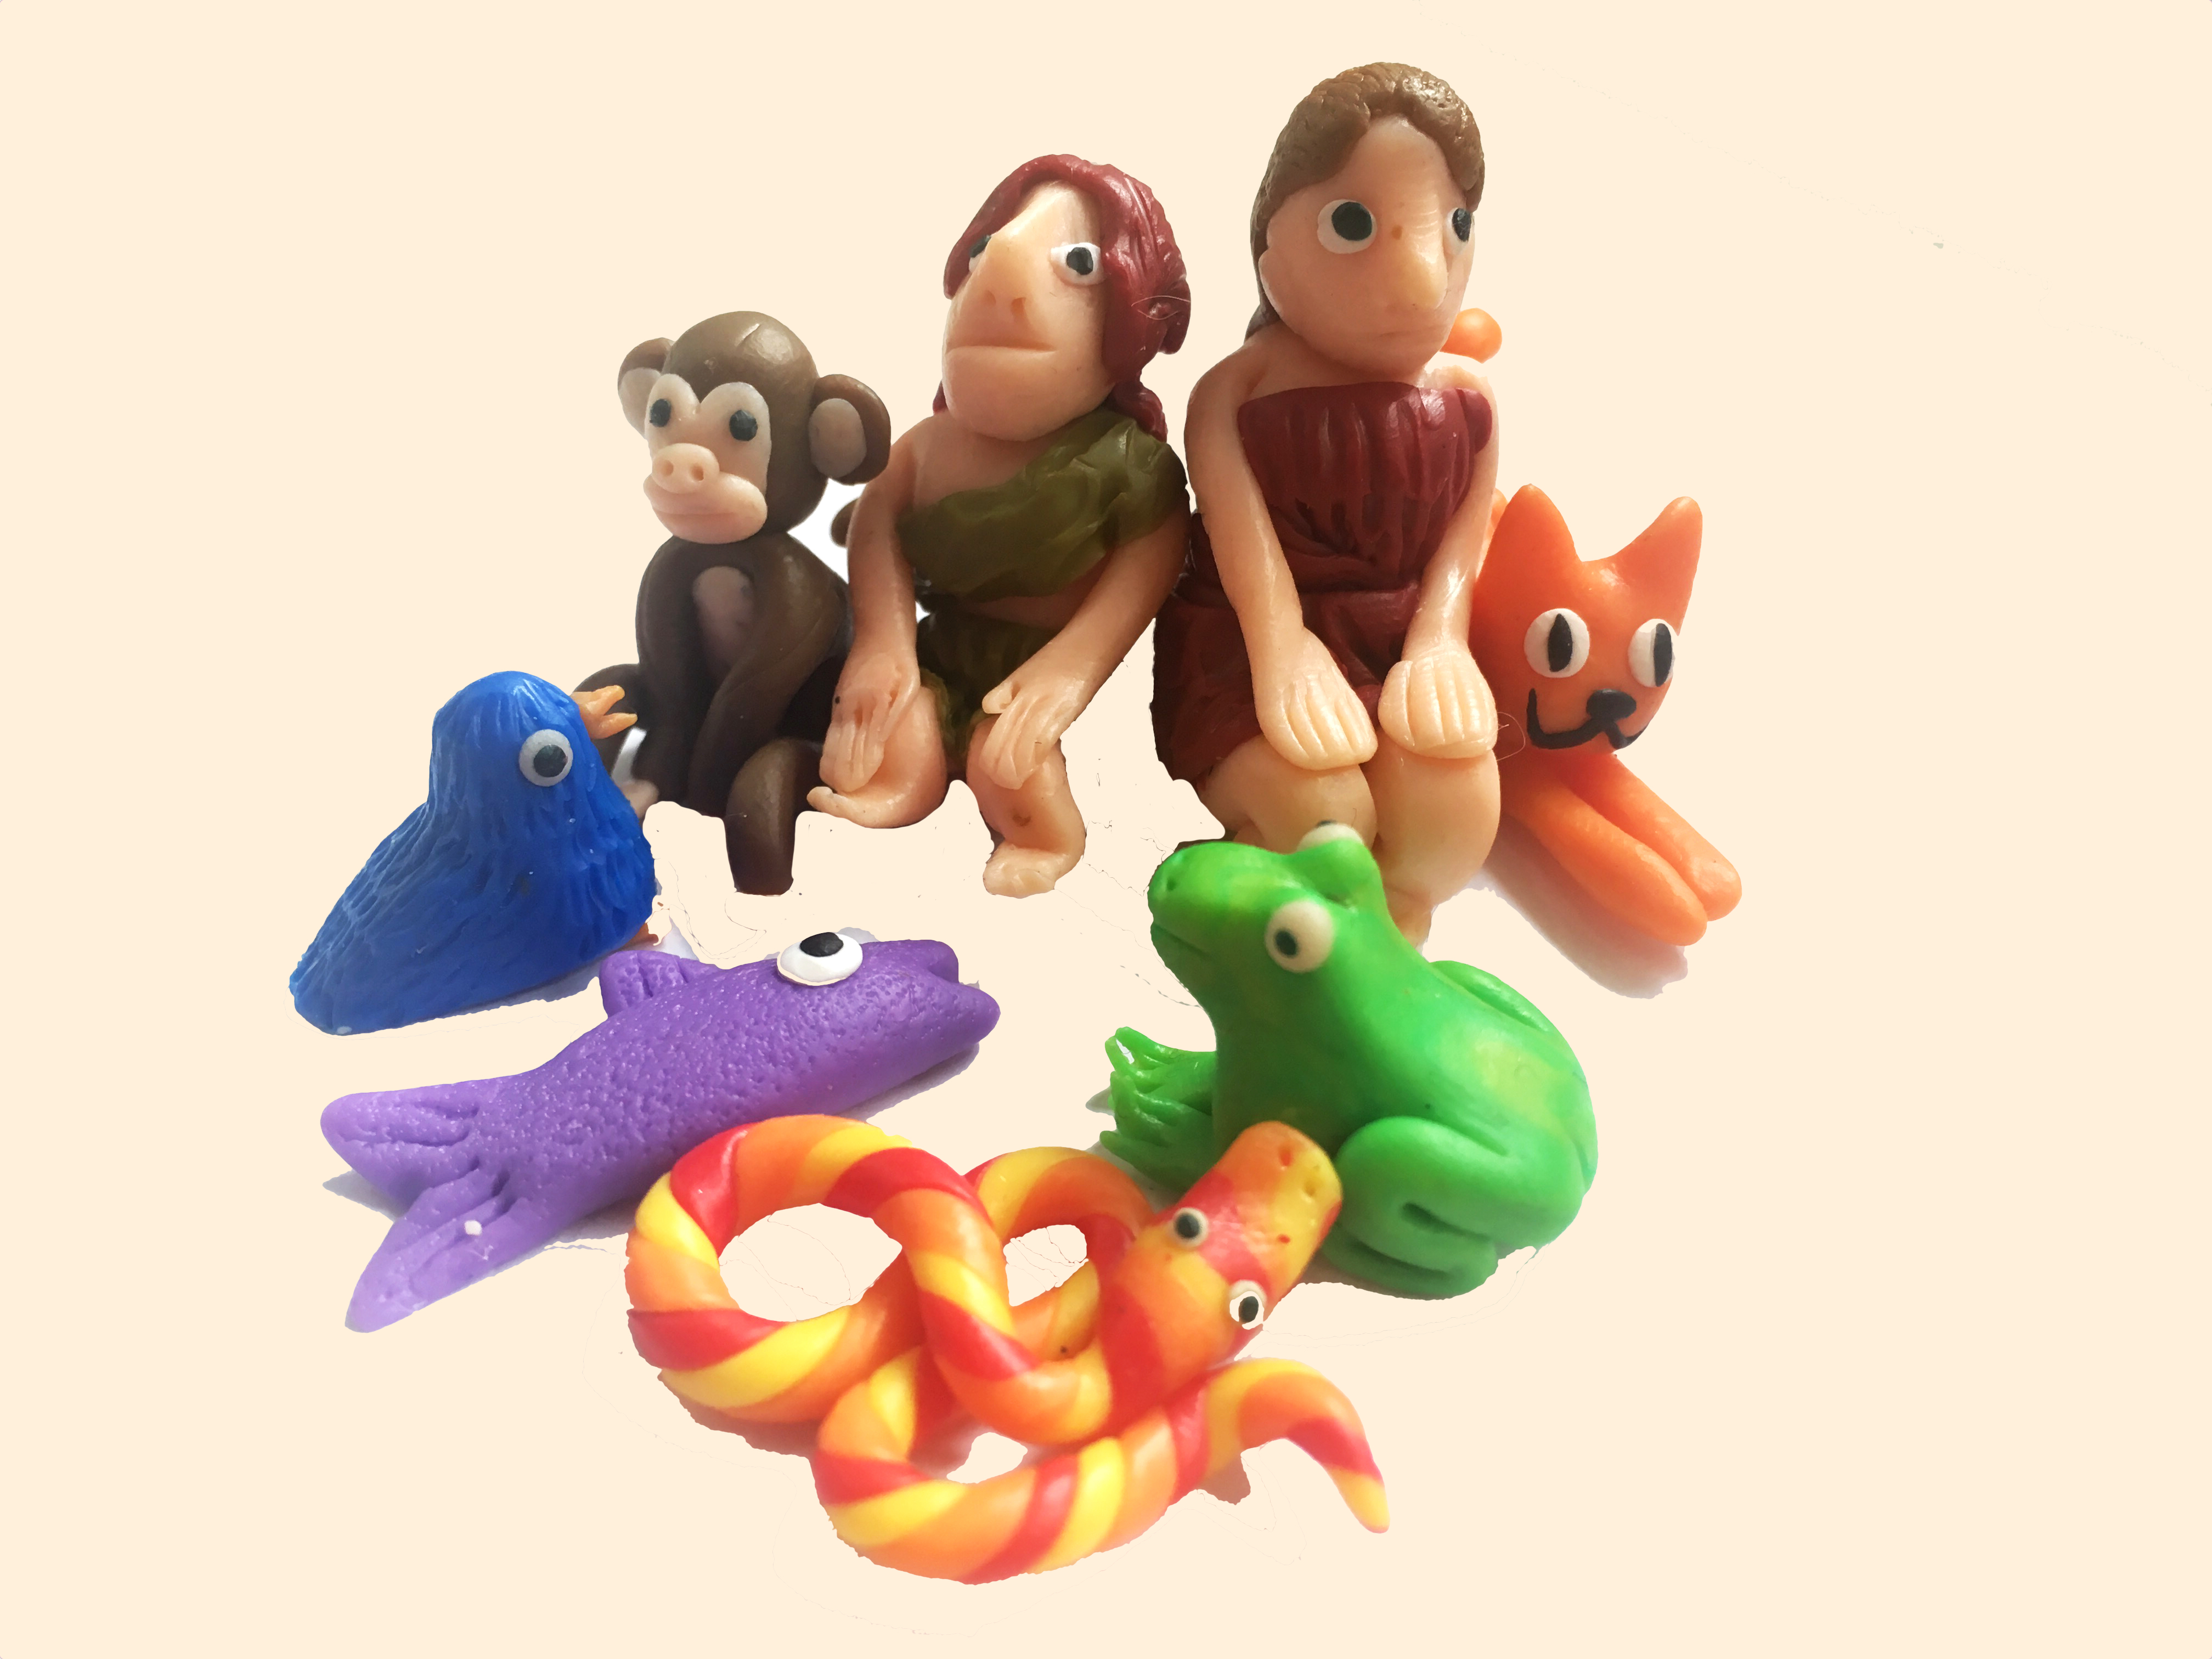 2 humans, a monkey, a bird, a cat, a frog, a fish and a snake made out of bright coloured modelling clay. 